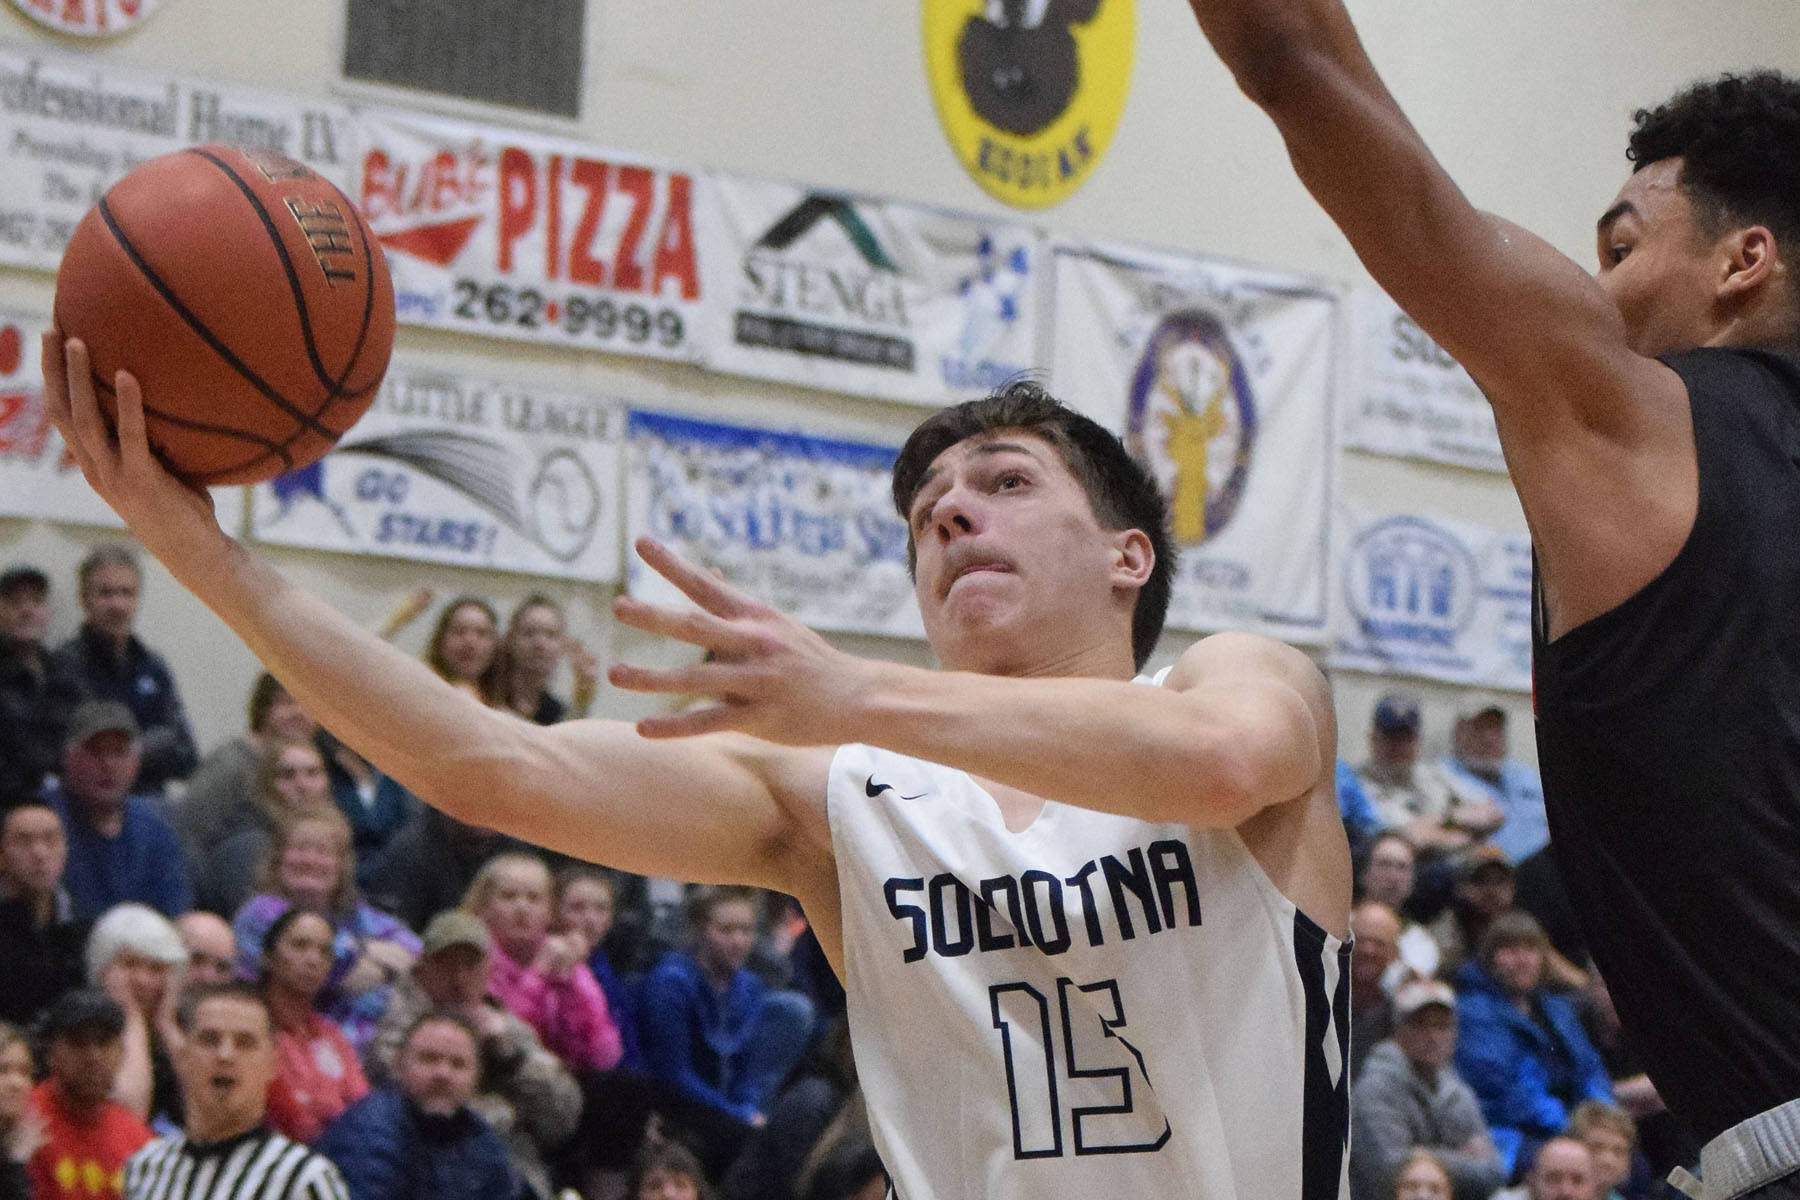 SoHi sweeps Friday NLC semis, clinch state spots